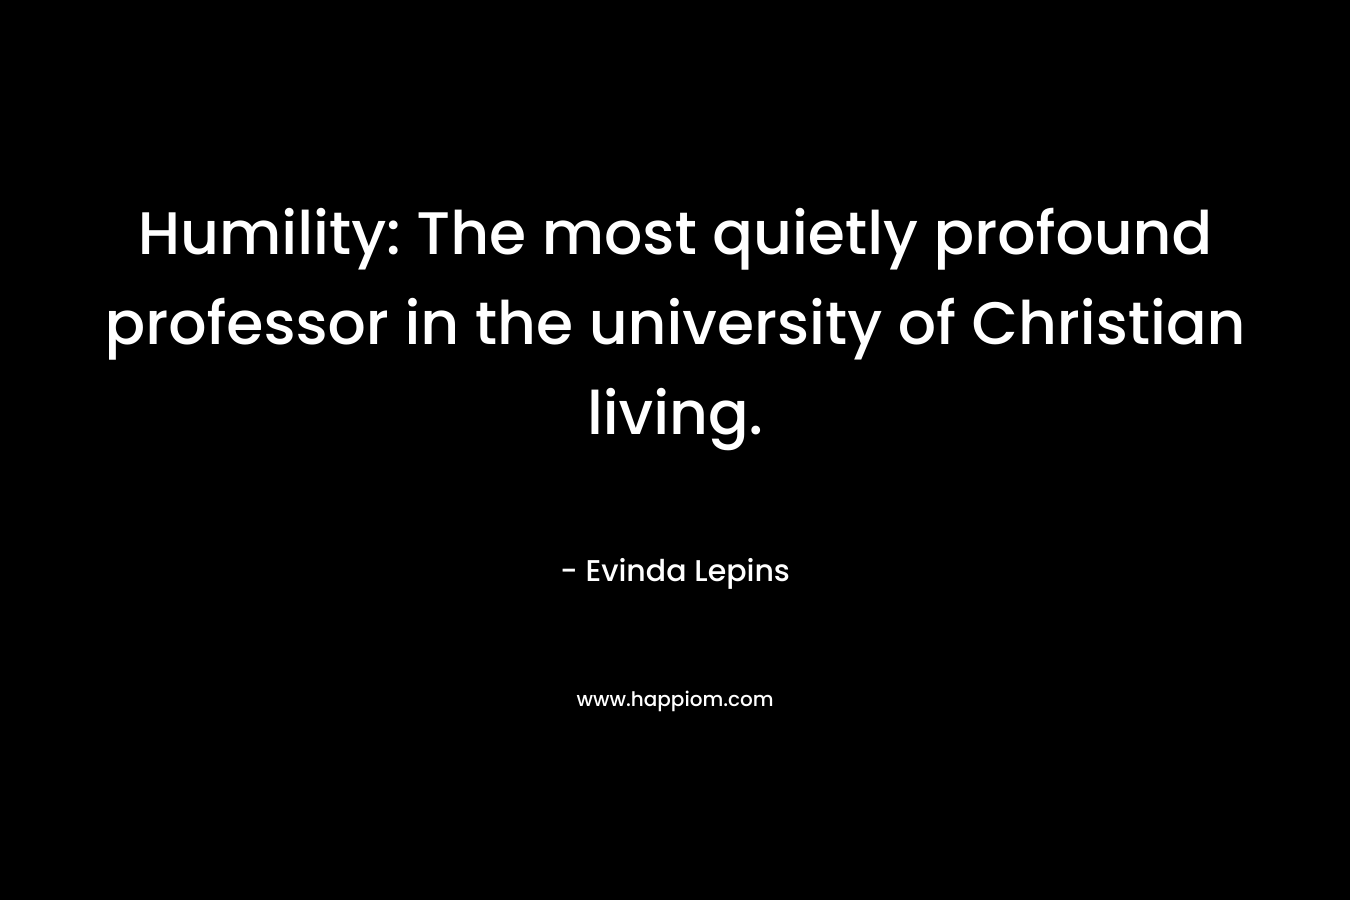 Humility: The most quietly profound professor in the university of Christian living. – Evinda Lepins